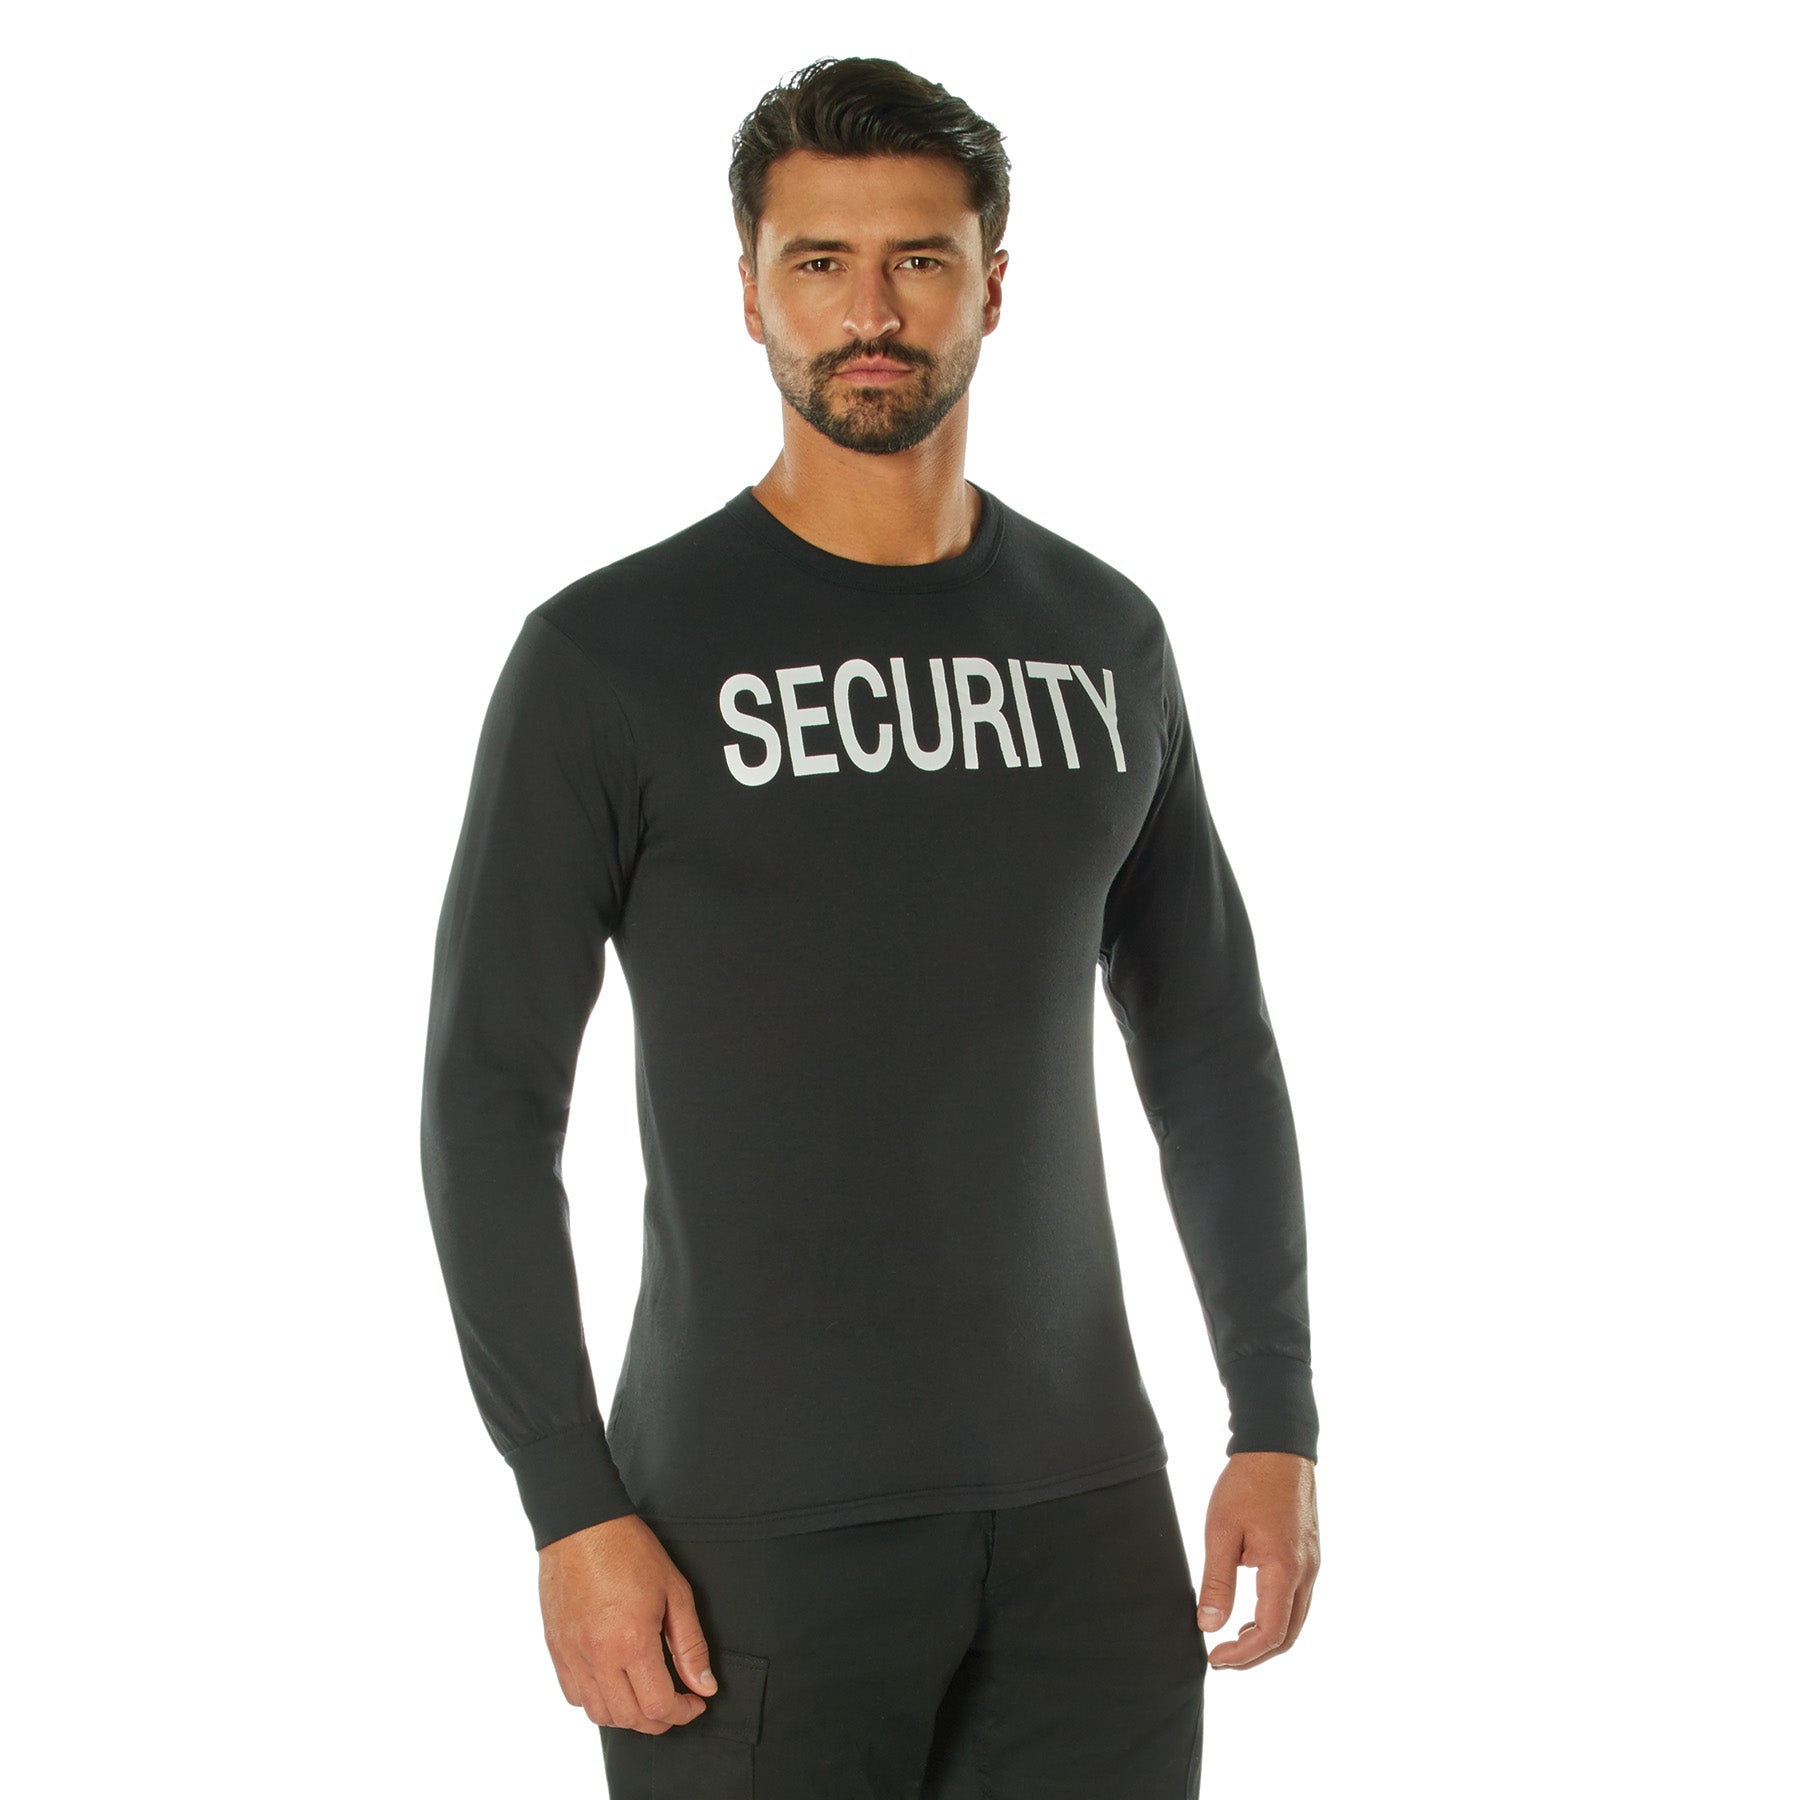 [Public Safety] Poly/Cotton 2-Sided Security Long Sleeve Shirts Security White - Black